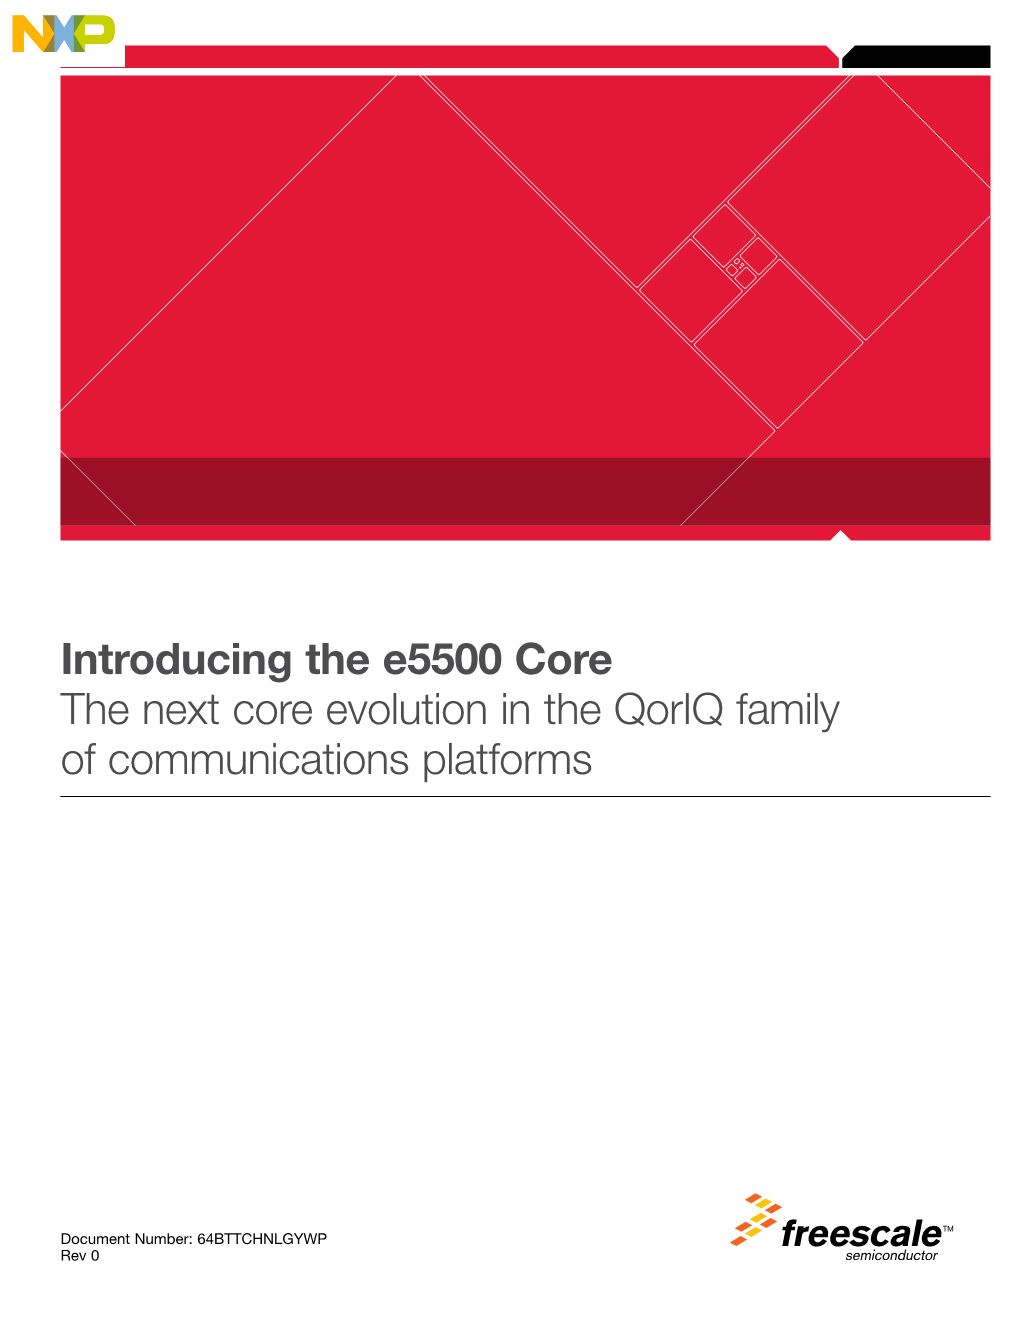 Introducing the E5500 Core the Next Core Evolution in the Qoriq Family of Communications Platforms